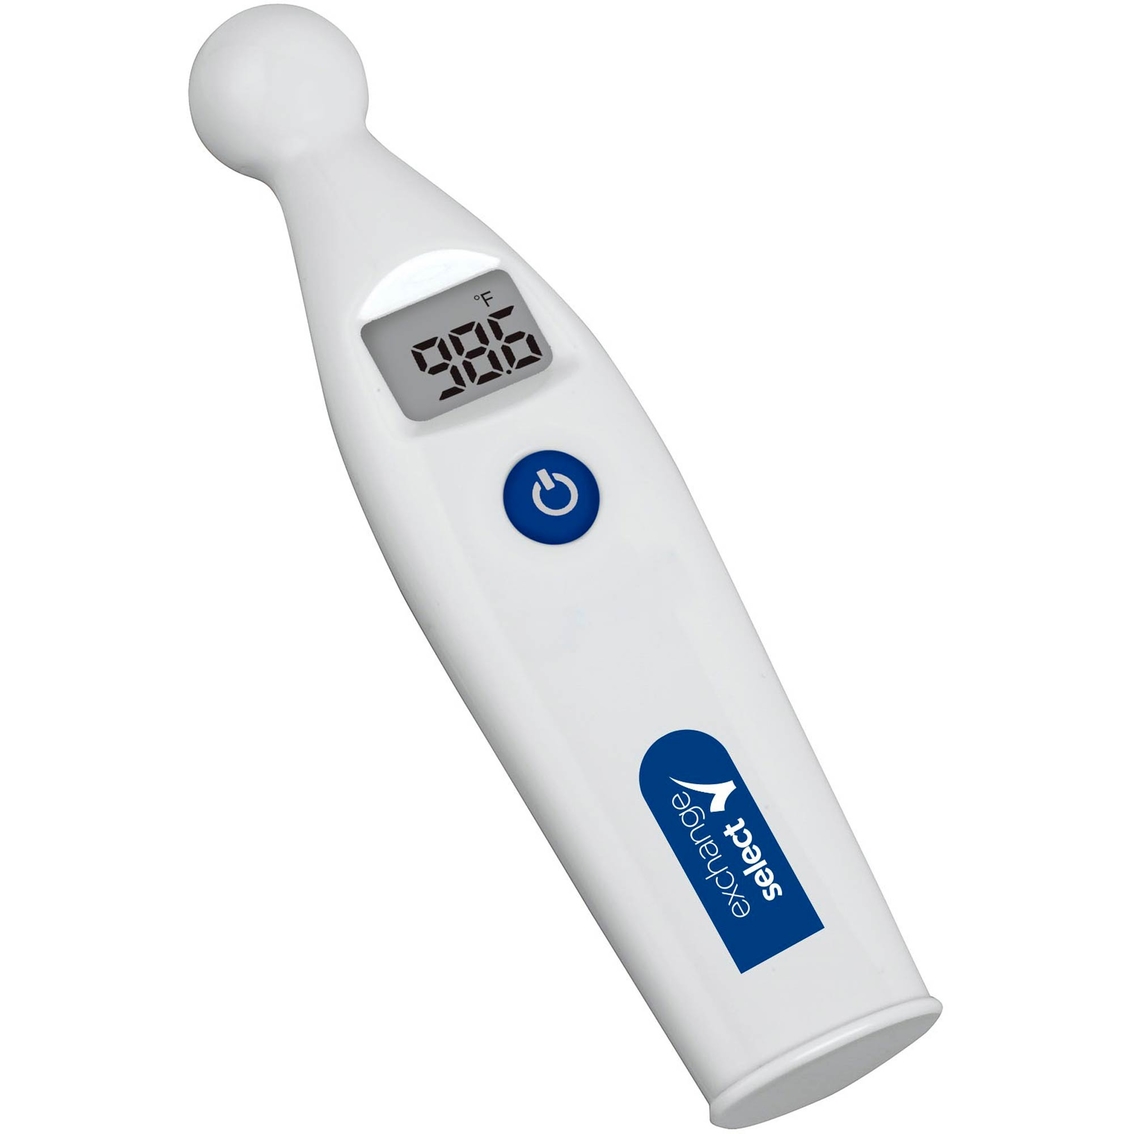 Exchange Select Temple Touch Mini Digital Thermometer - Image 2 of 2